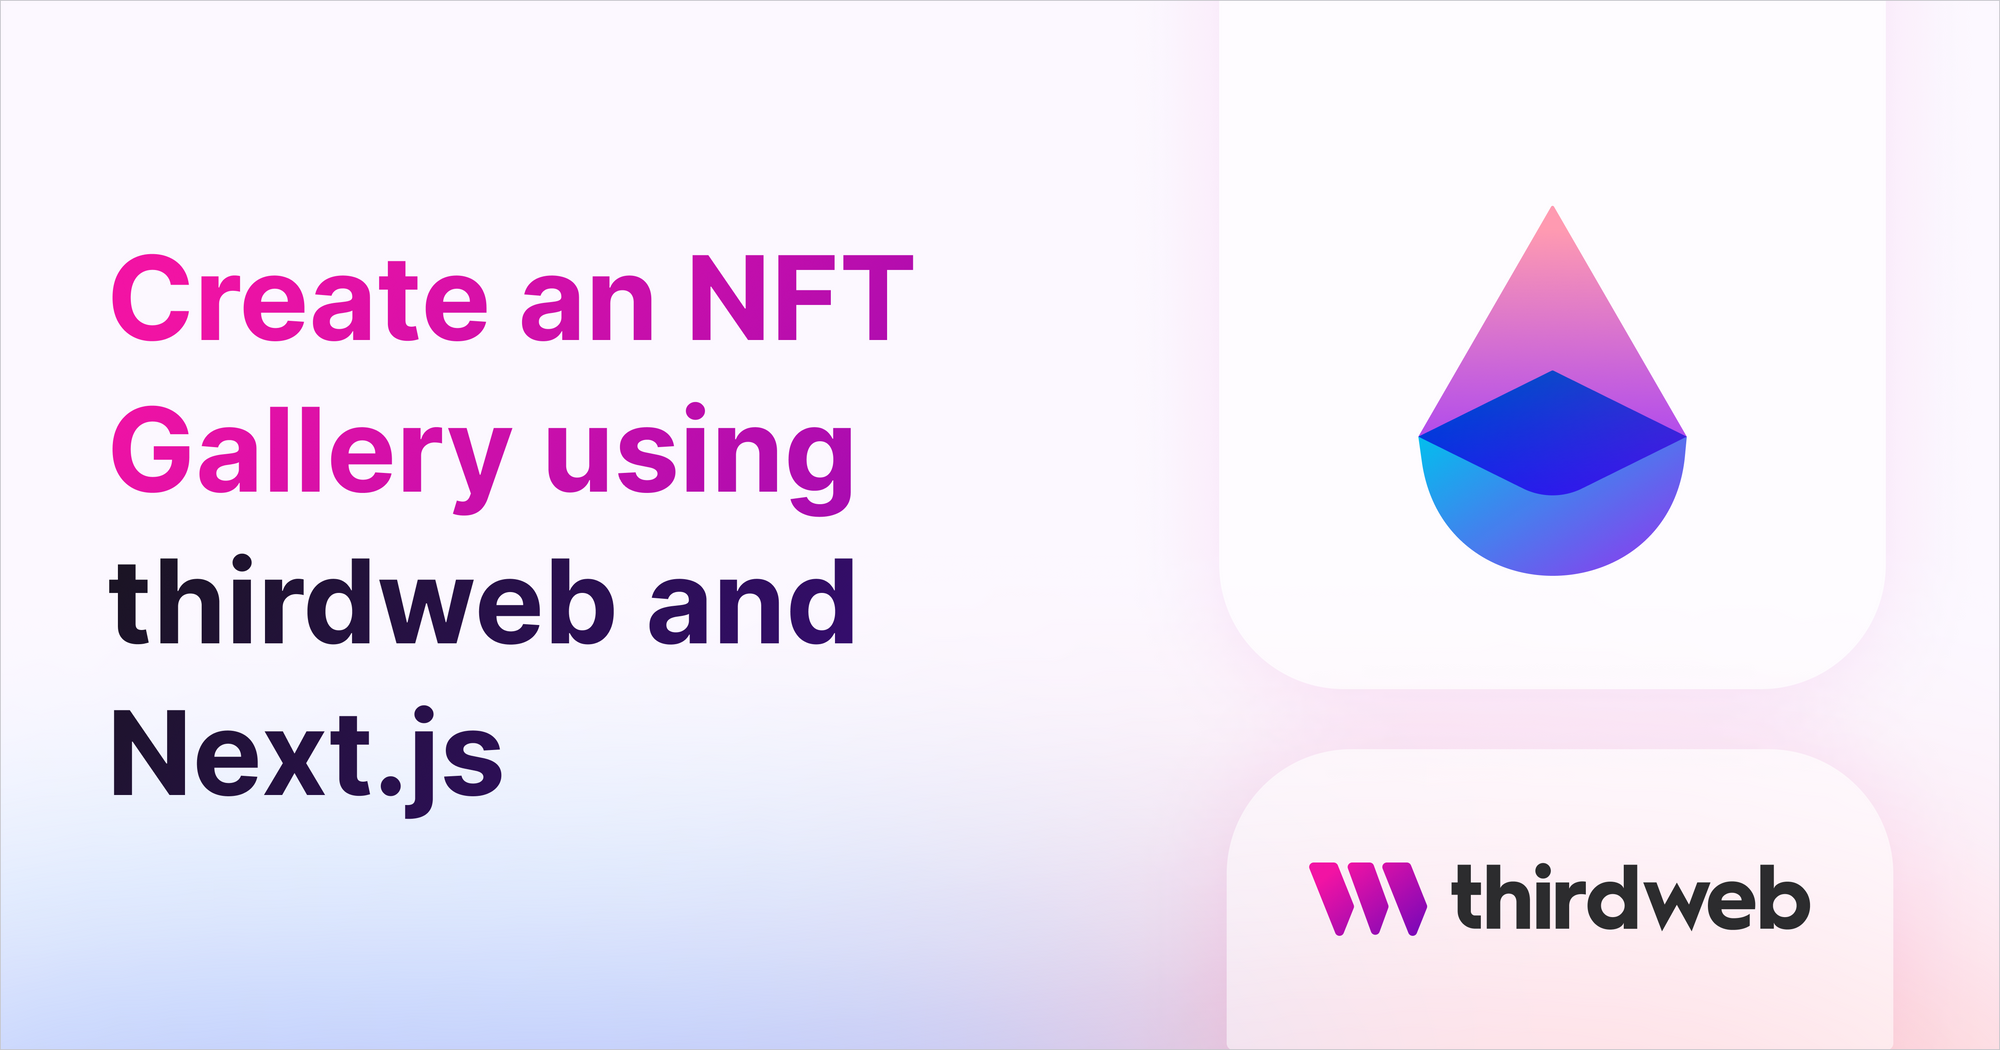 Create an NFT Gallery using thirdweb and Next.js